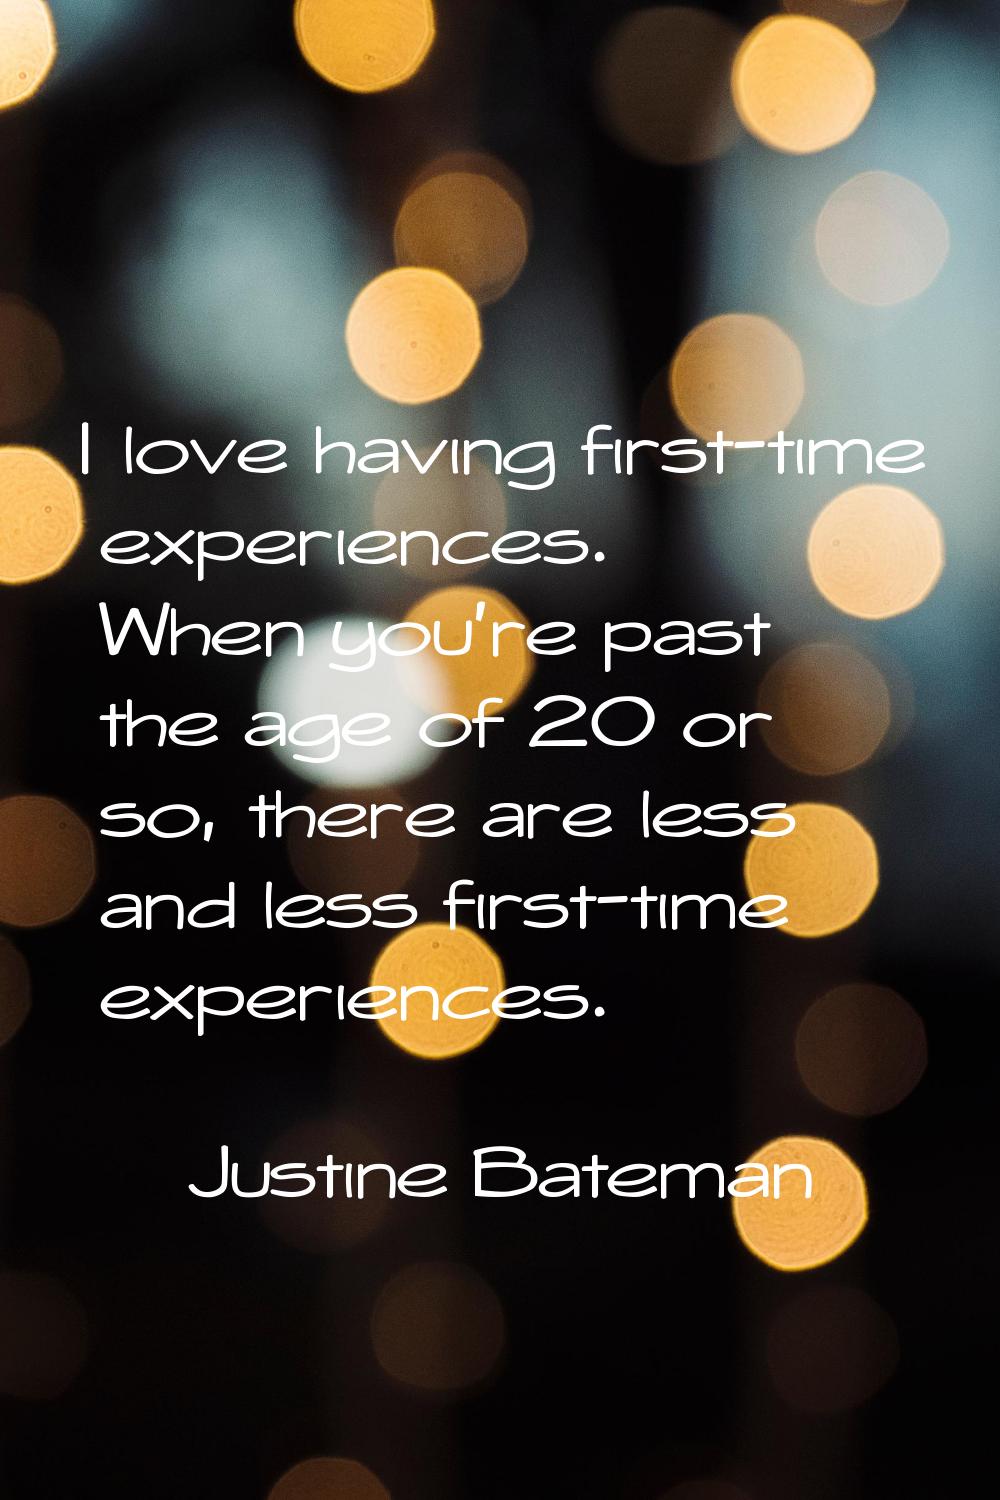 I love having first-time experiences. When you're past the age of 20 or so, there are less and less